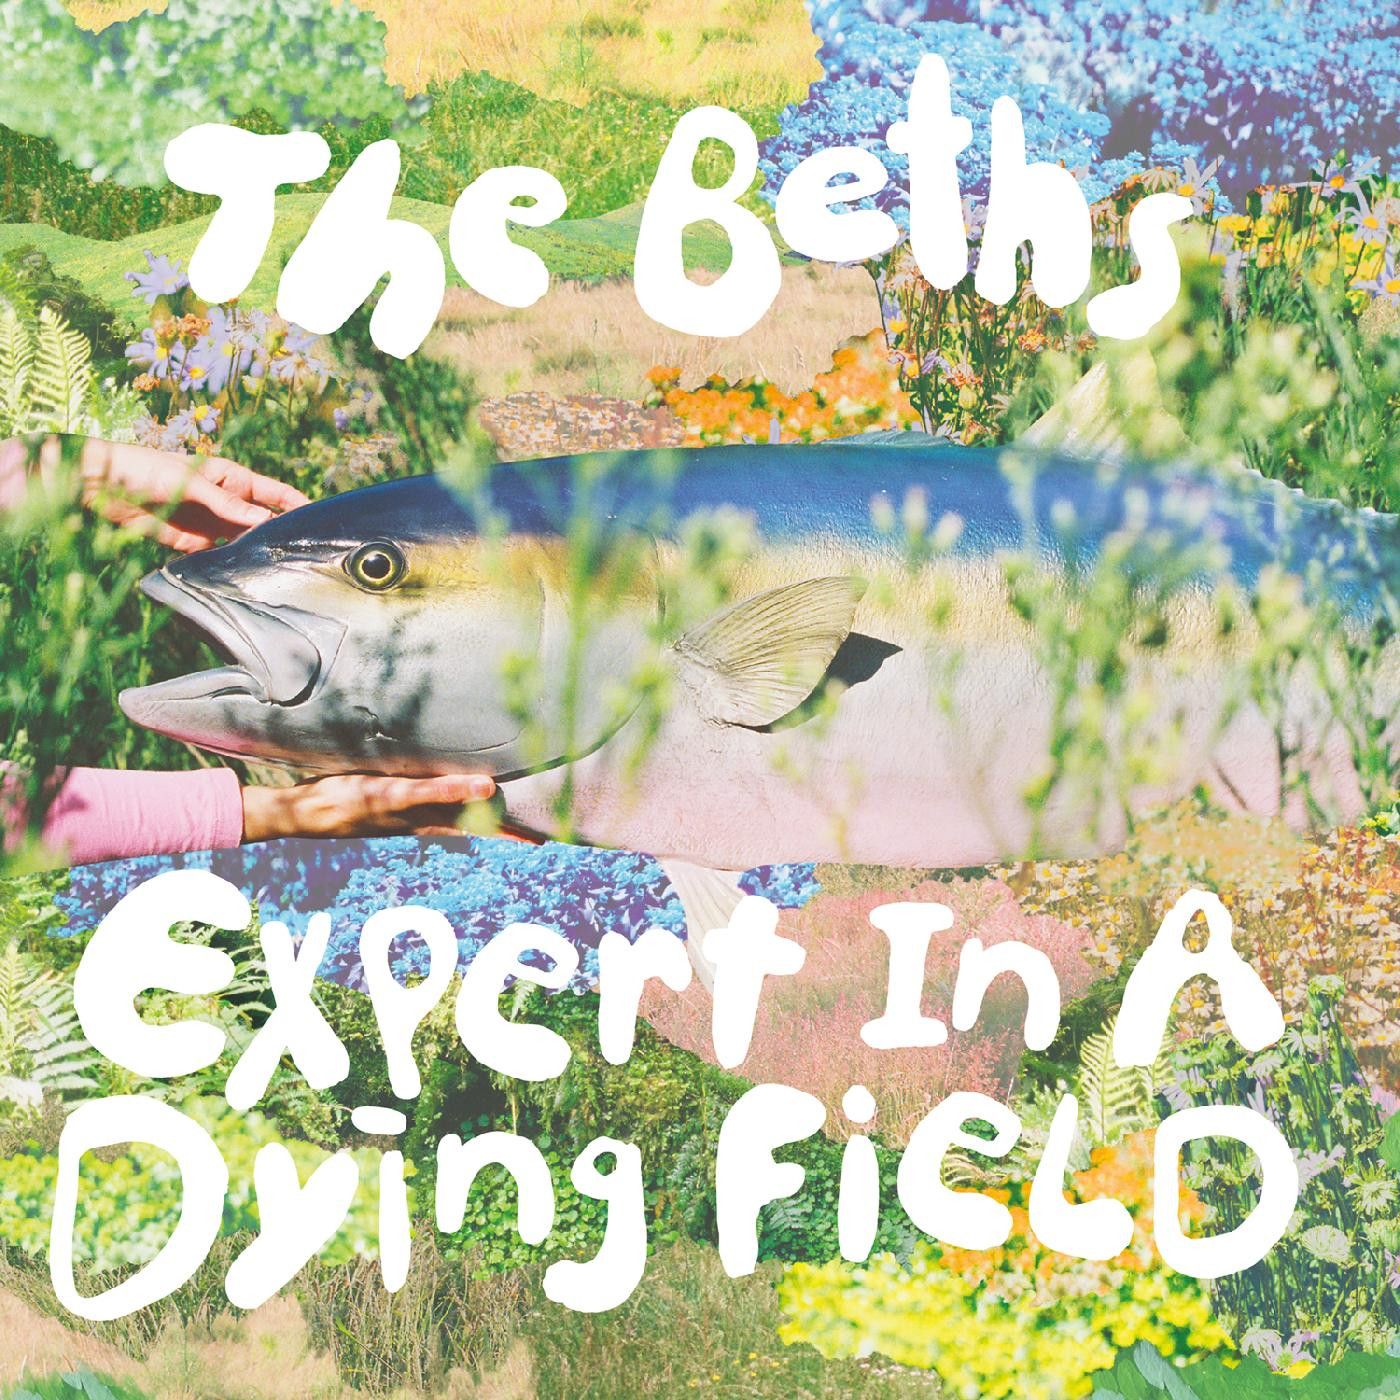 BETHS / ベス / EXPERT IN A DYING FIELD (DELUXE 2LP)